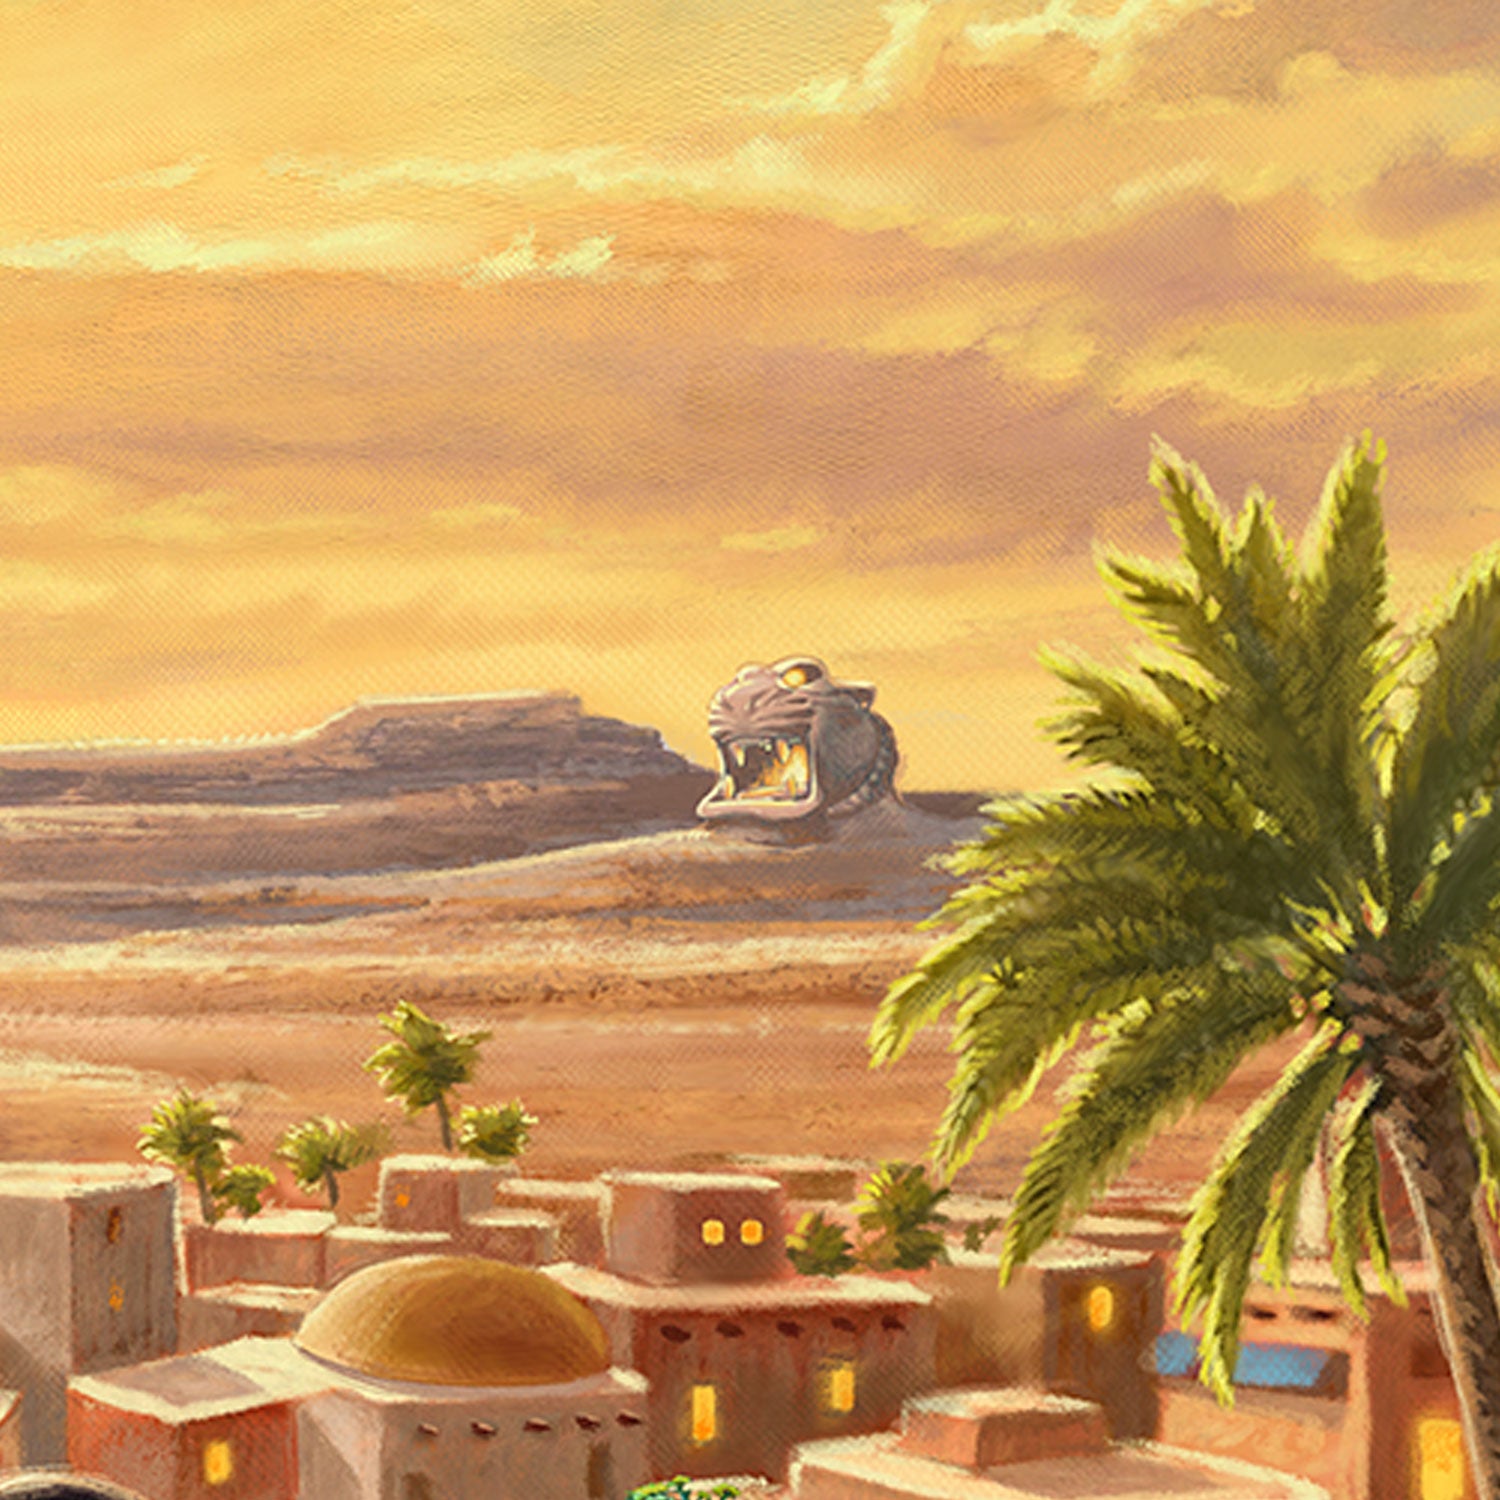 In the background, the kingdom of Agrabah is illuminated by the setting sun. - Closeup 